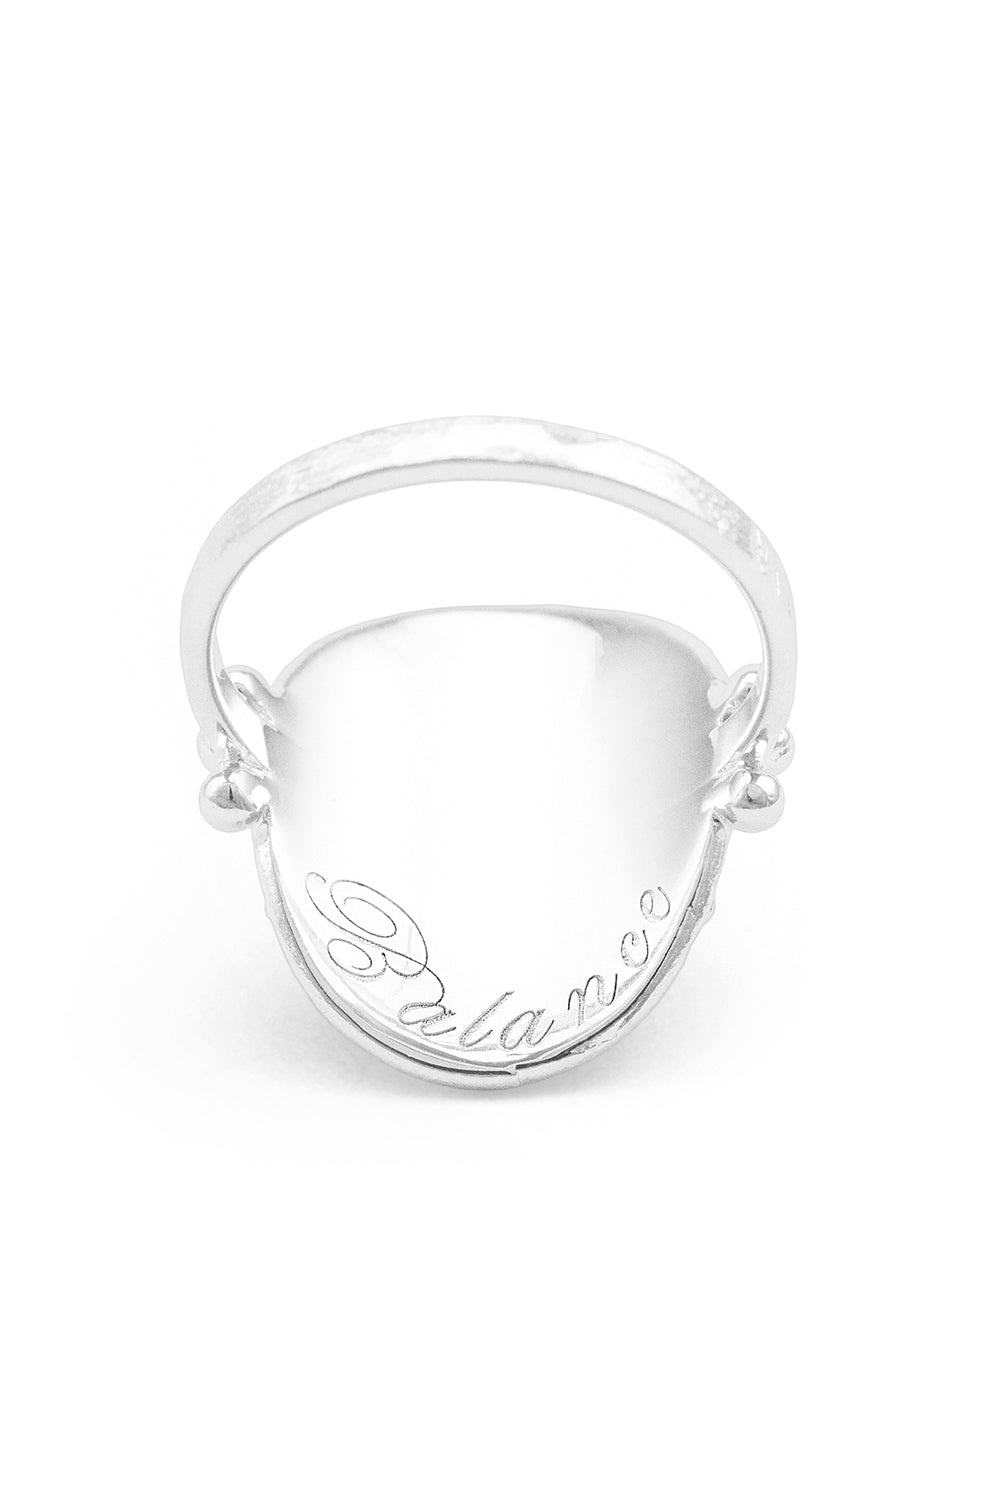 BY CHARLOTTE HARMONY RING SILVER PLATED